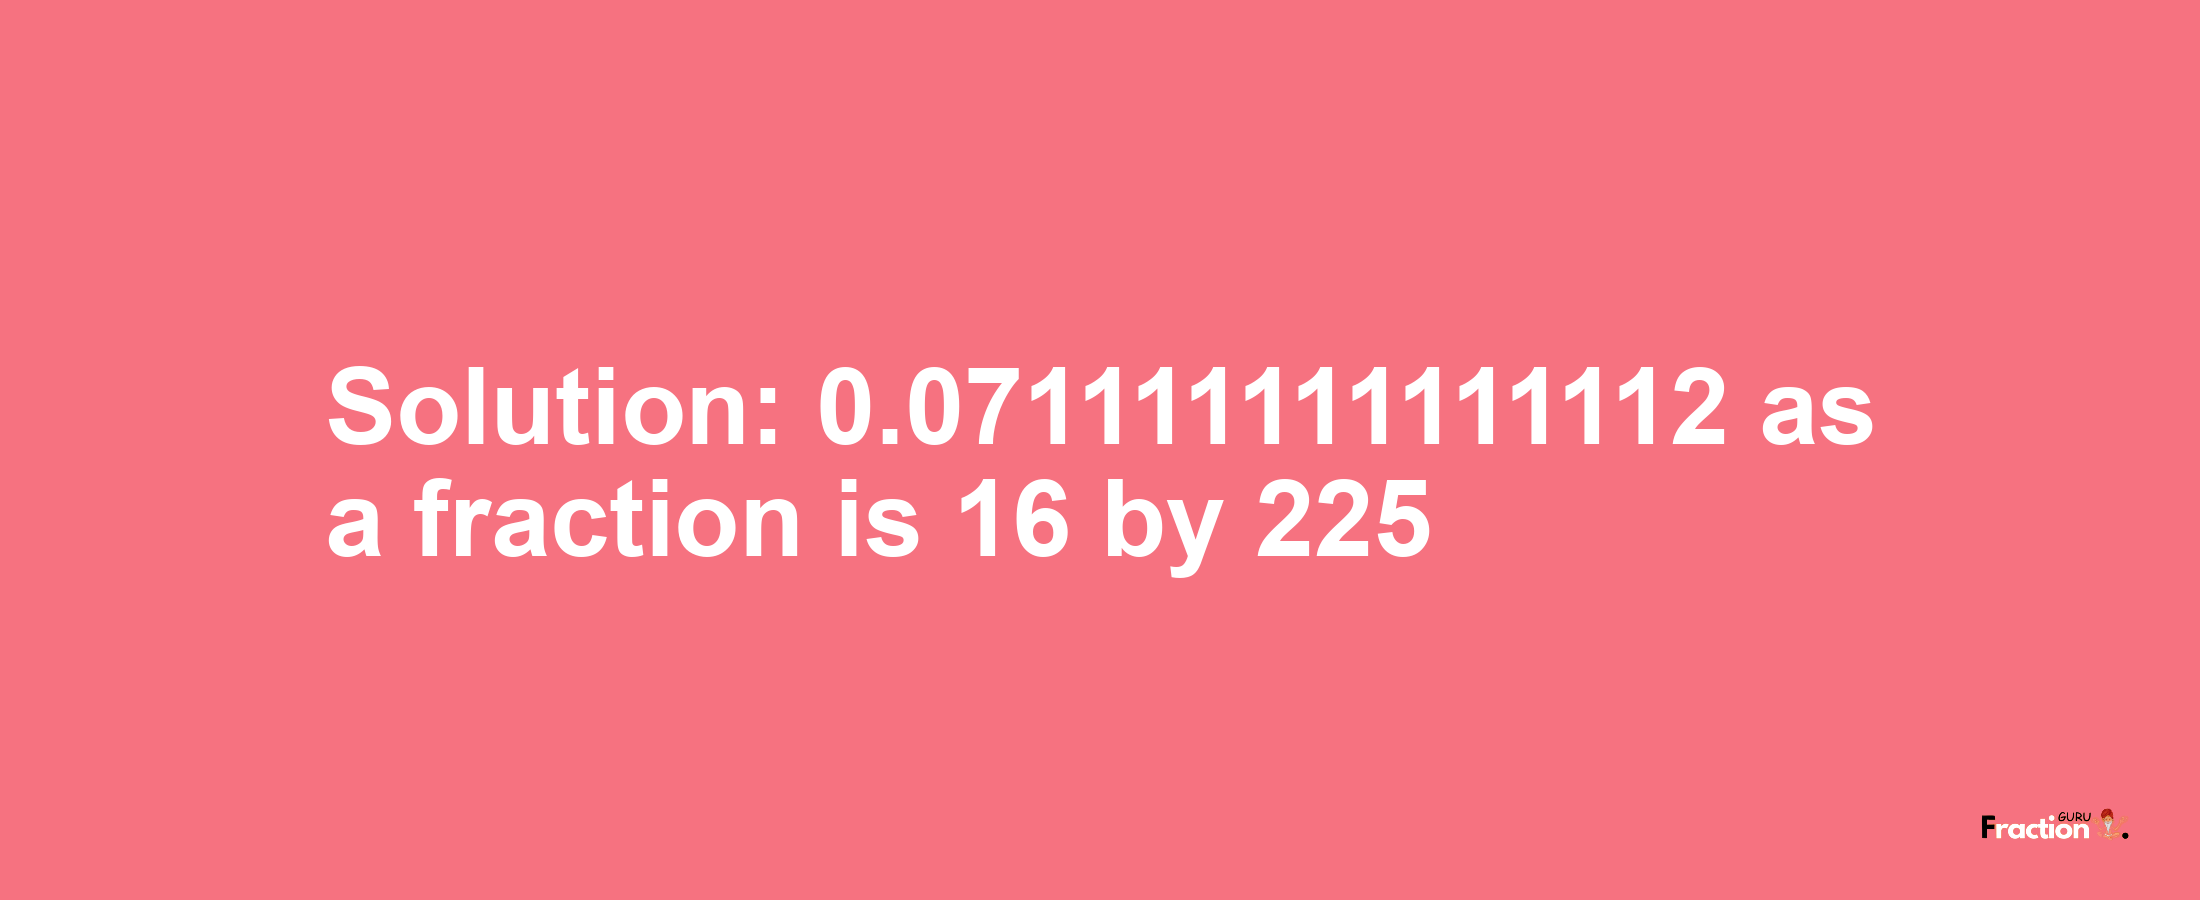 Solution:0.071111111111112 as a fraction is 16/225